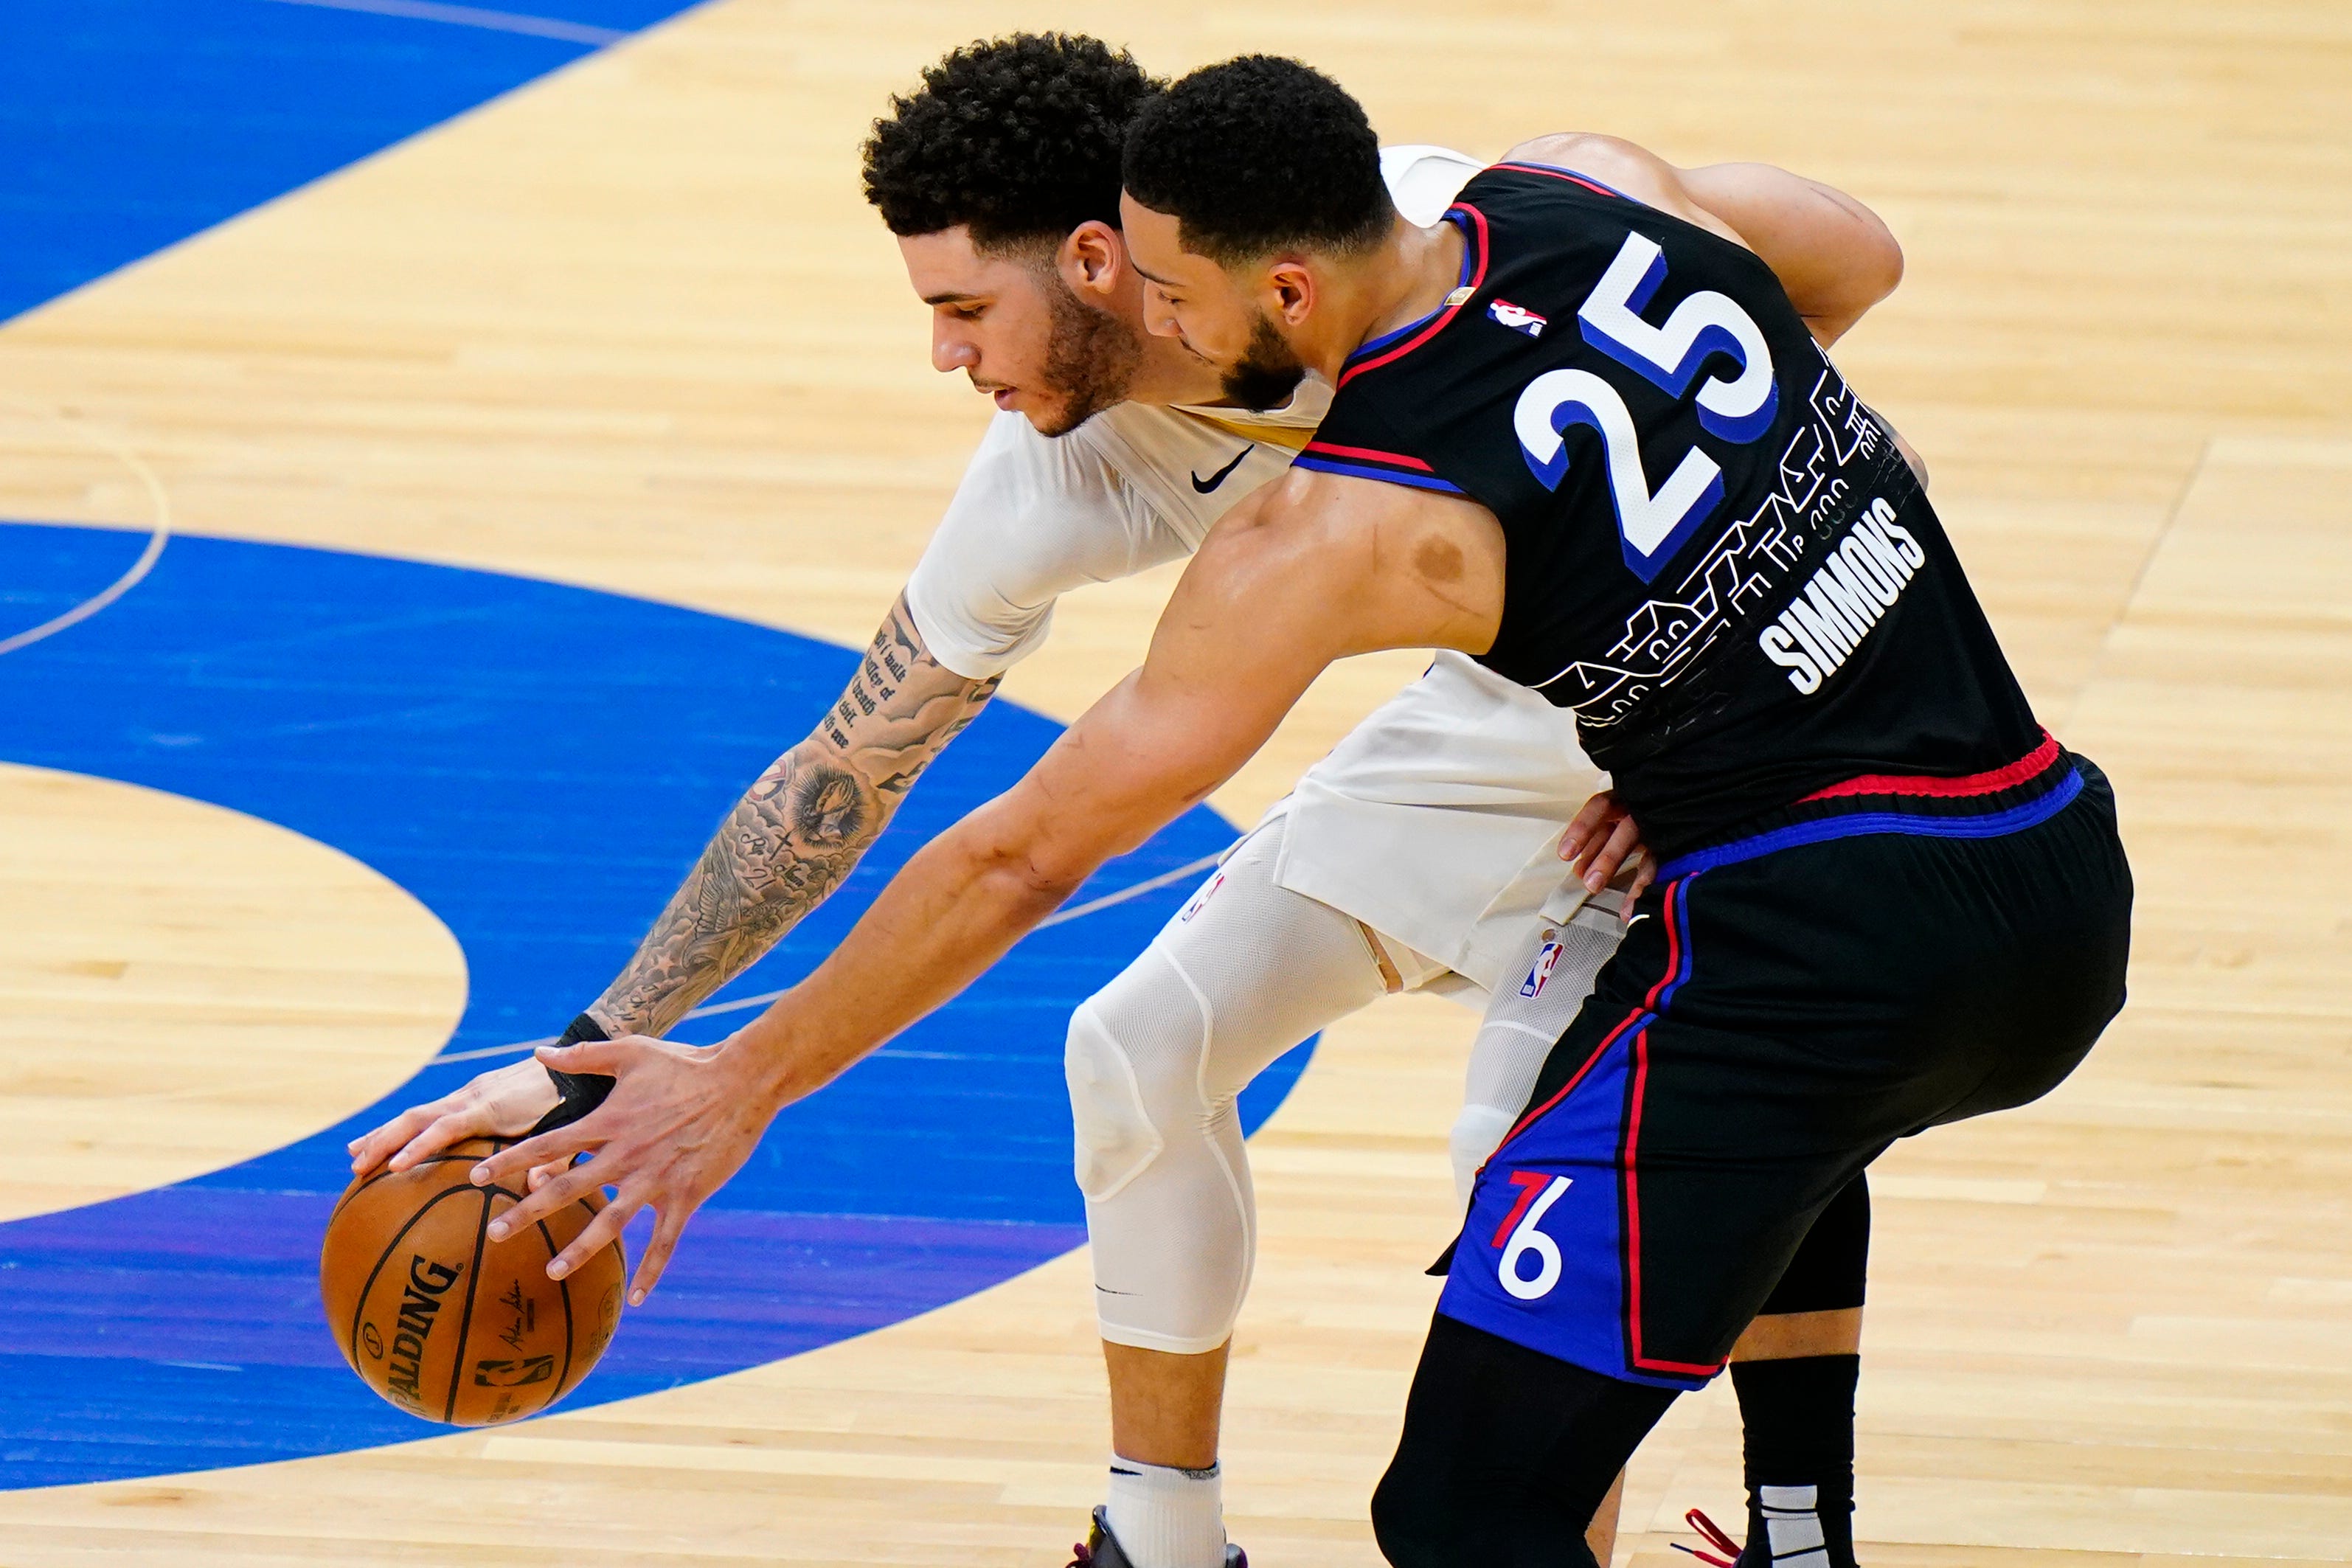 Philadelphia 76ers' Ben Simmons (right) steals the ball from New Orleans Pelicans' Lonzo Ball during the first half of an NBA basketball game, Friday, May 7, 2021, in Philadelphia.